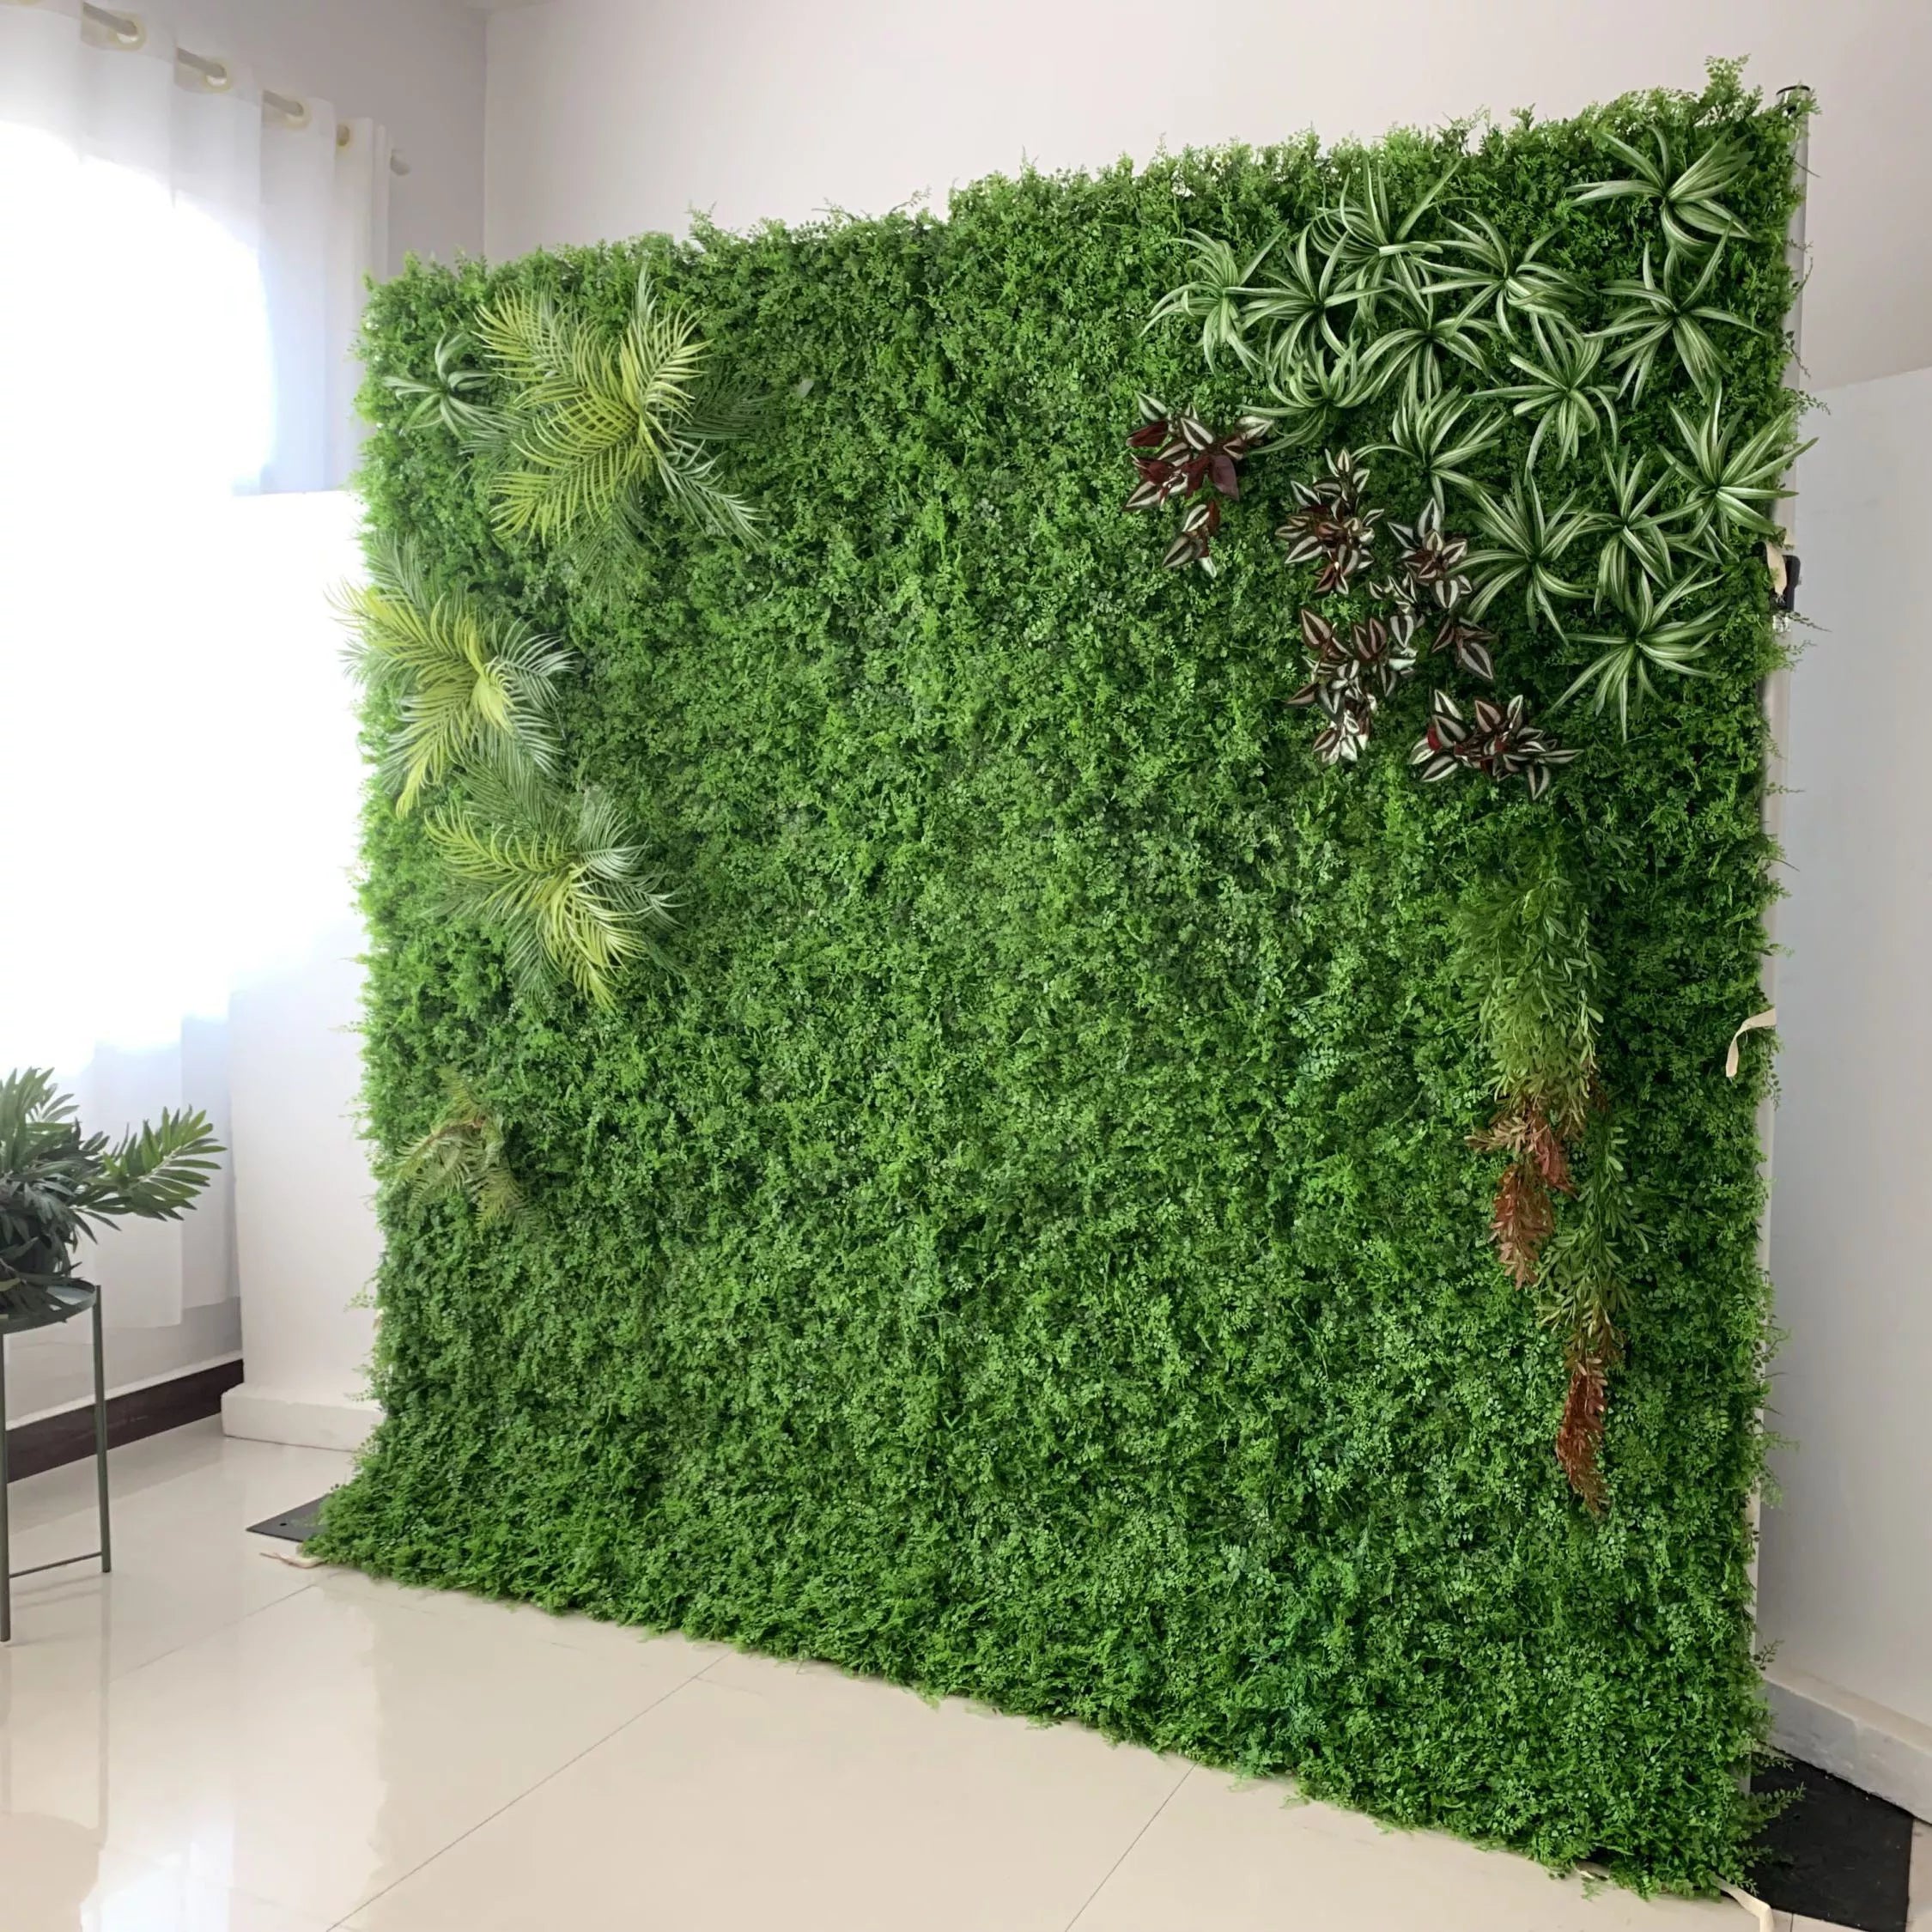 Valar Flowers Roll Up Fabric Artificial Vivid Green Grass Wall Wedding Backdrop, Floral Party Decor, Event Photography-VF-086-3